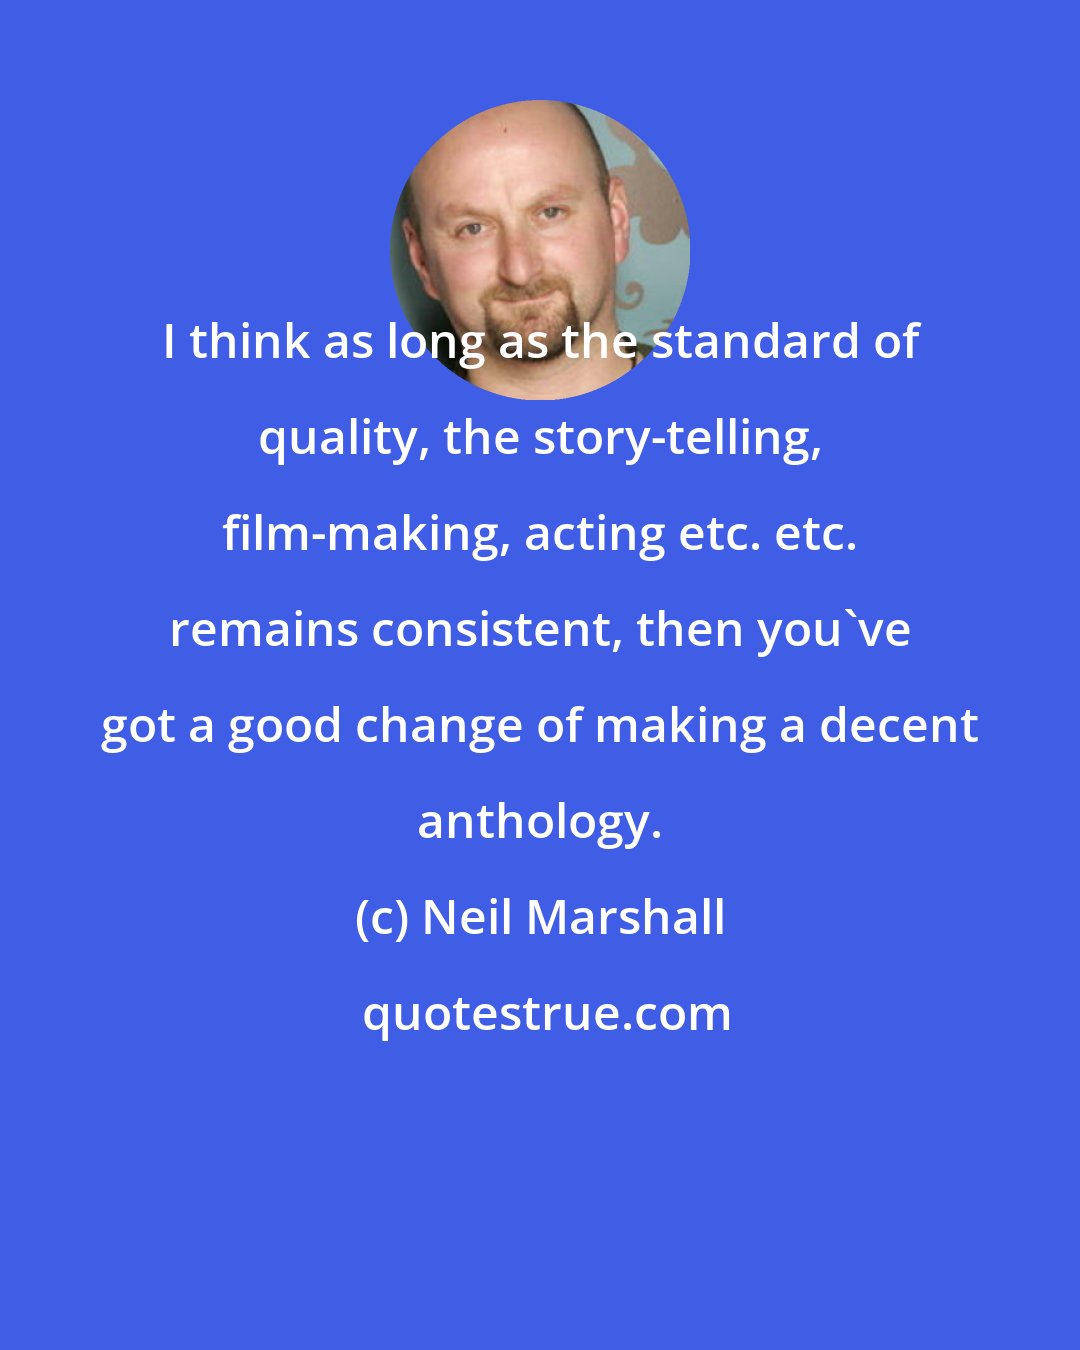 Neil Marshall: I think as long as the standard of quality, the story-telling, film-making, acting etc. etc. remains consistent, then you've got a good change of making a decent anthology.